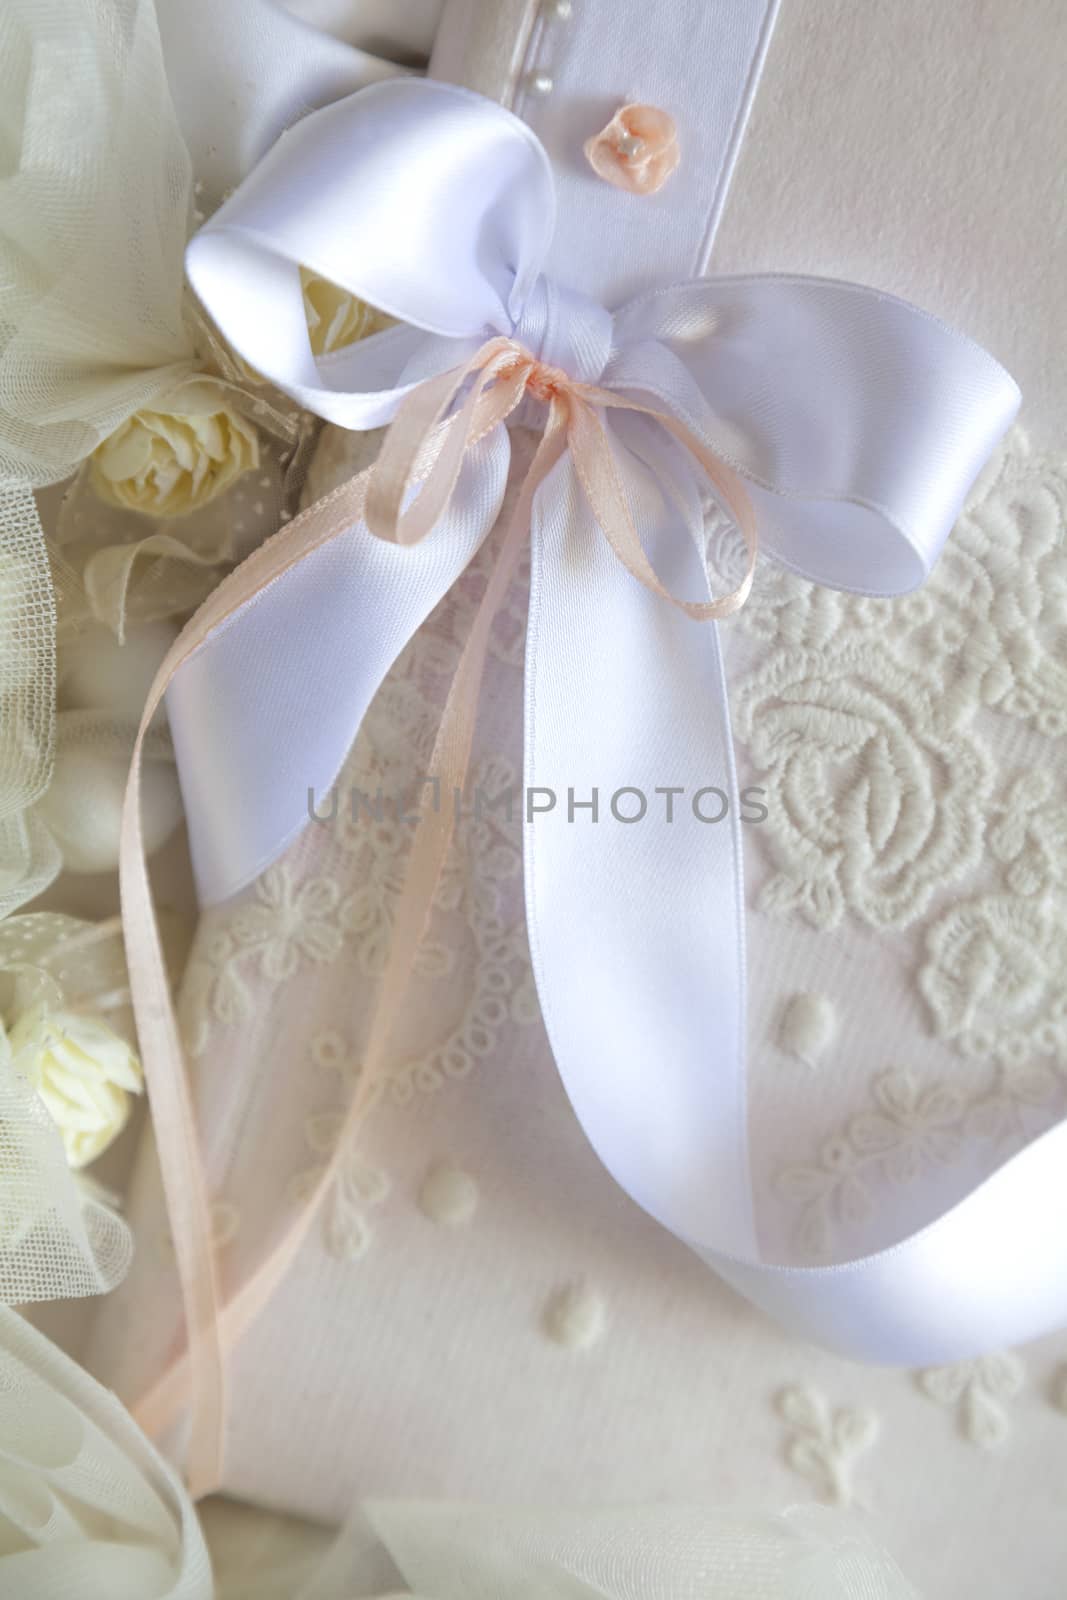 Wedding Book of Wishes decorated with ribbons and dried flowers